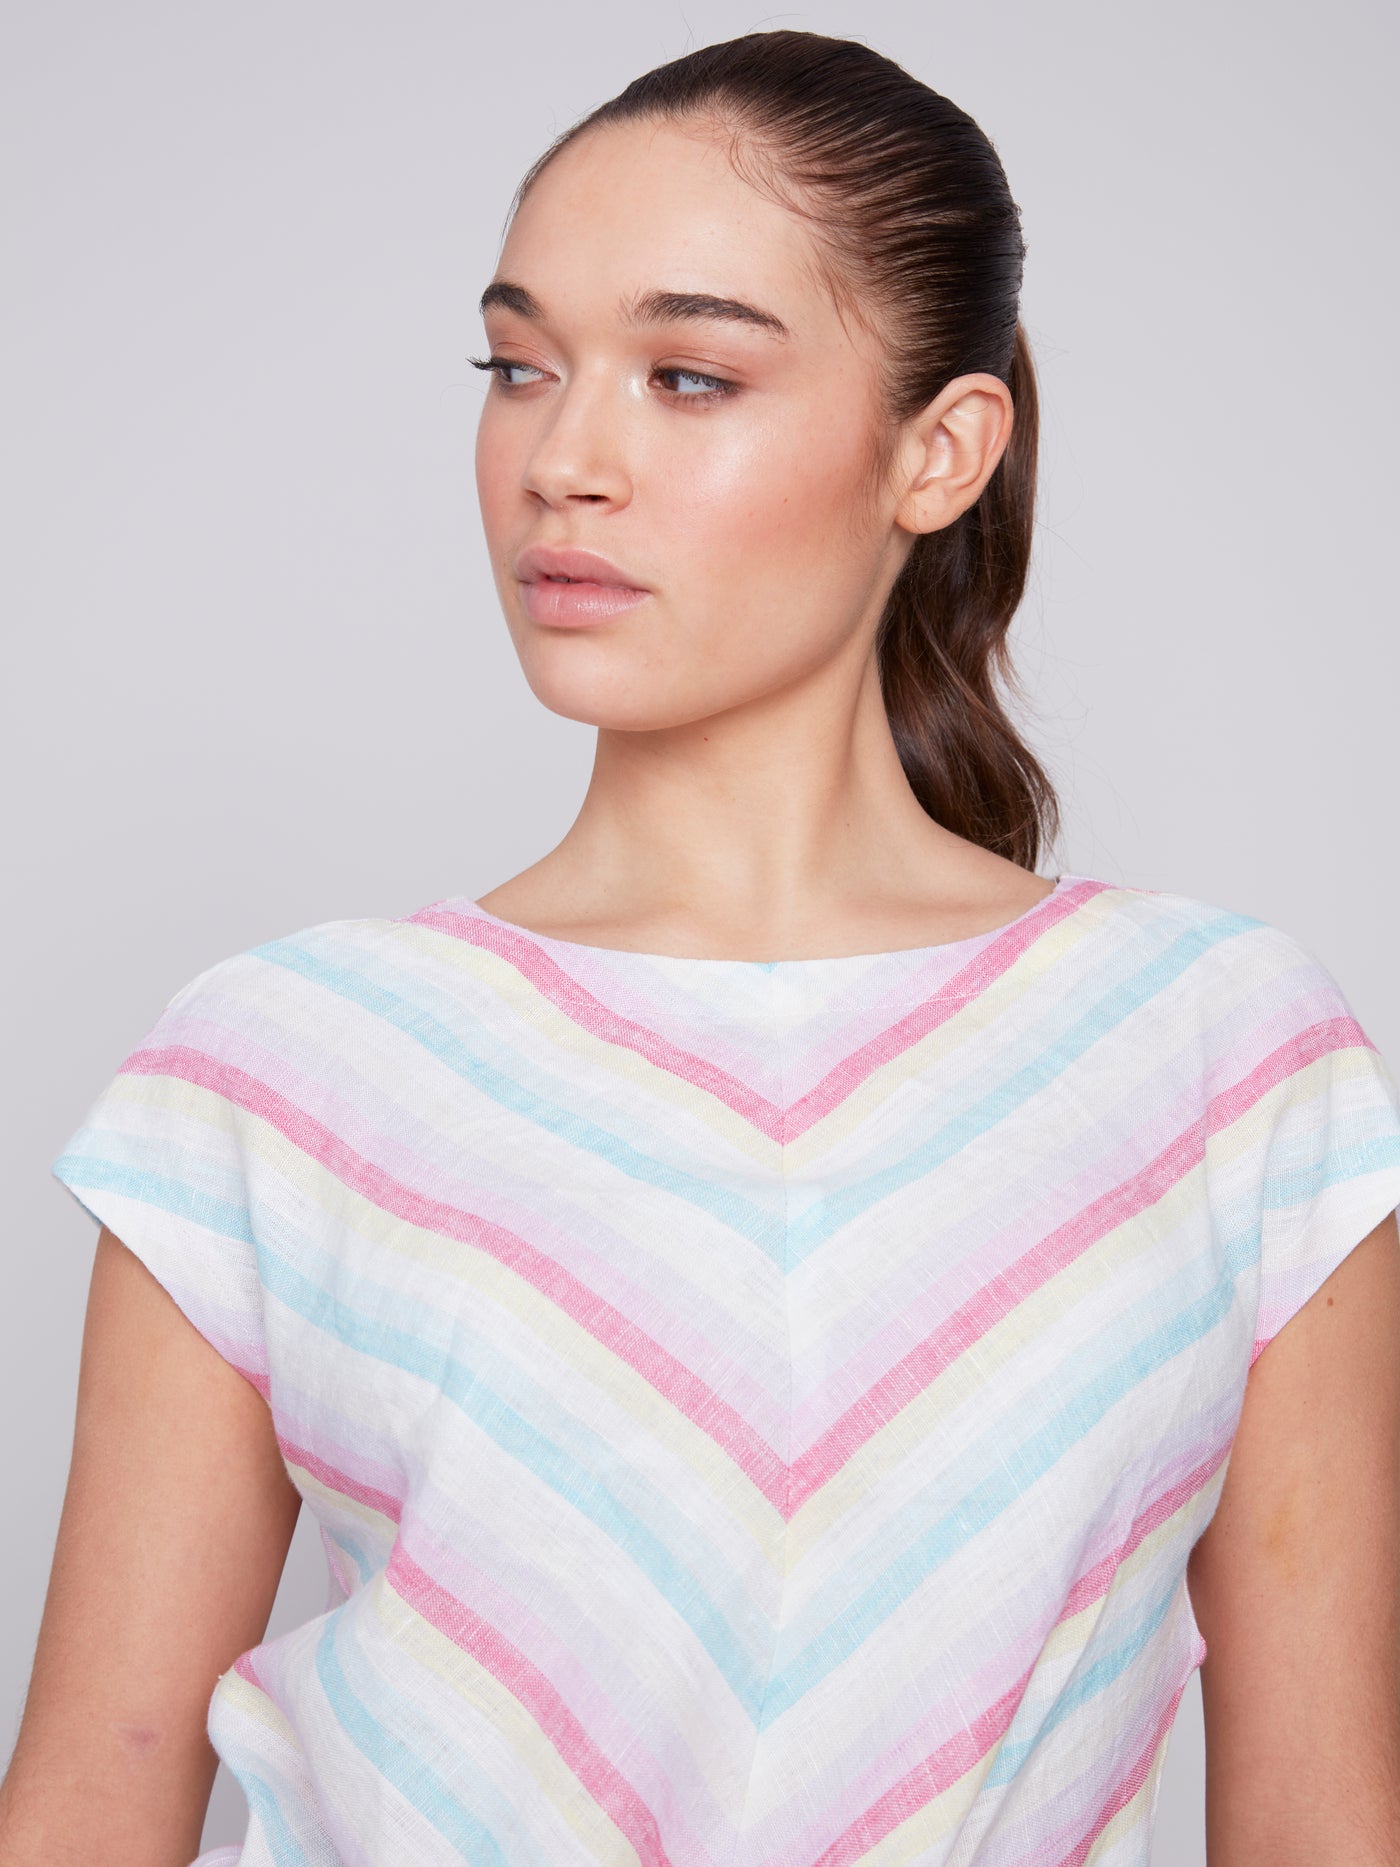 Charlie B Top - Front Tie Stripe - Lavender - SMALL